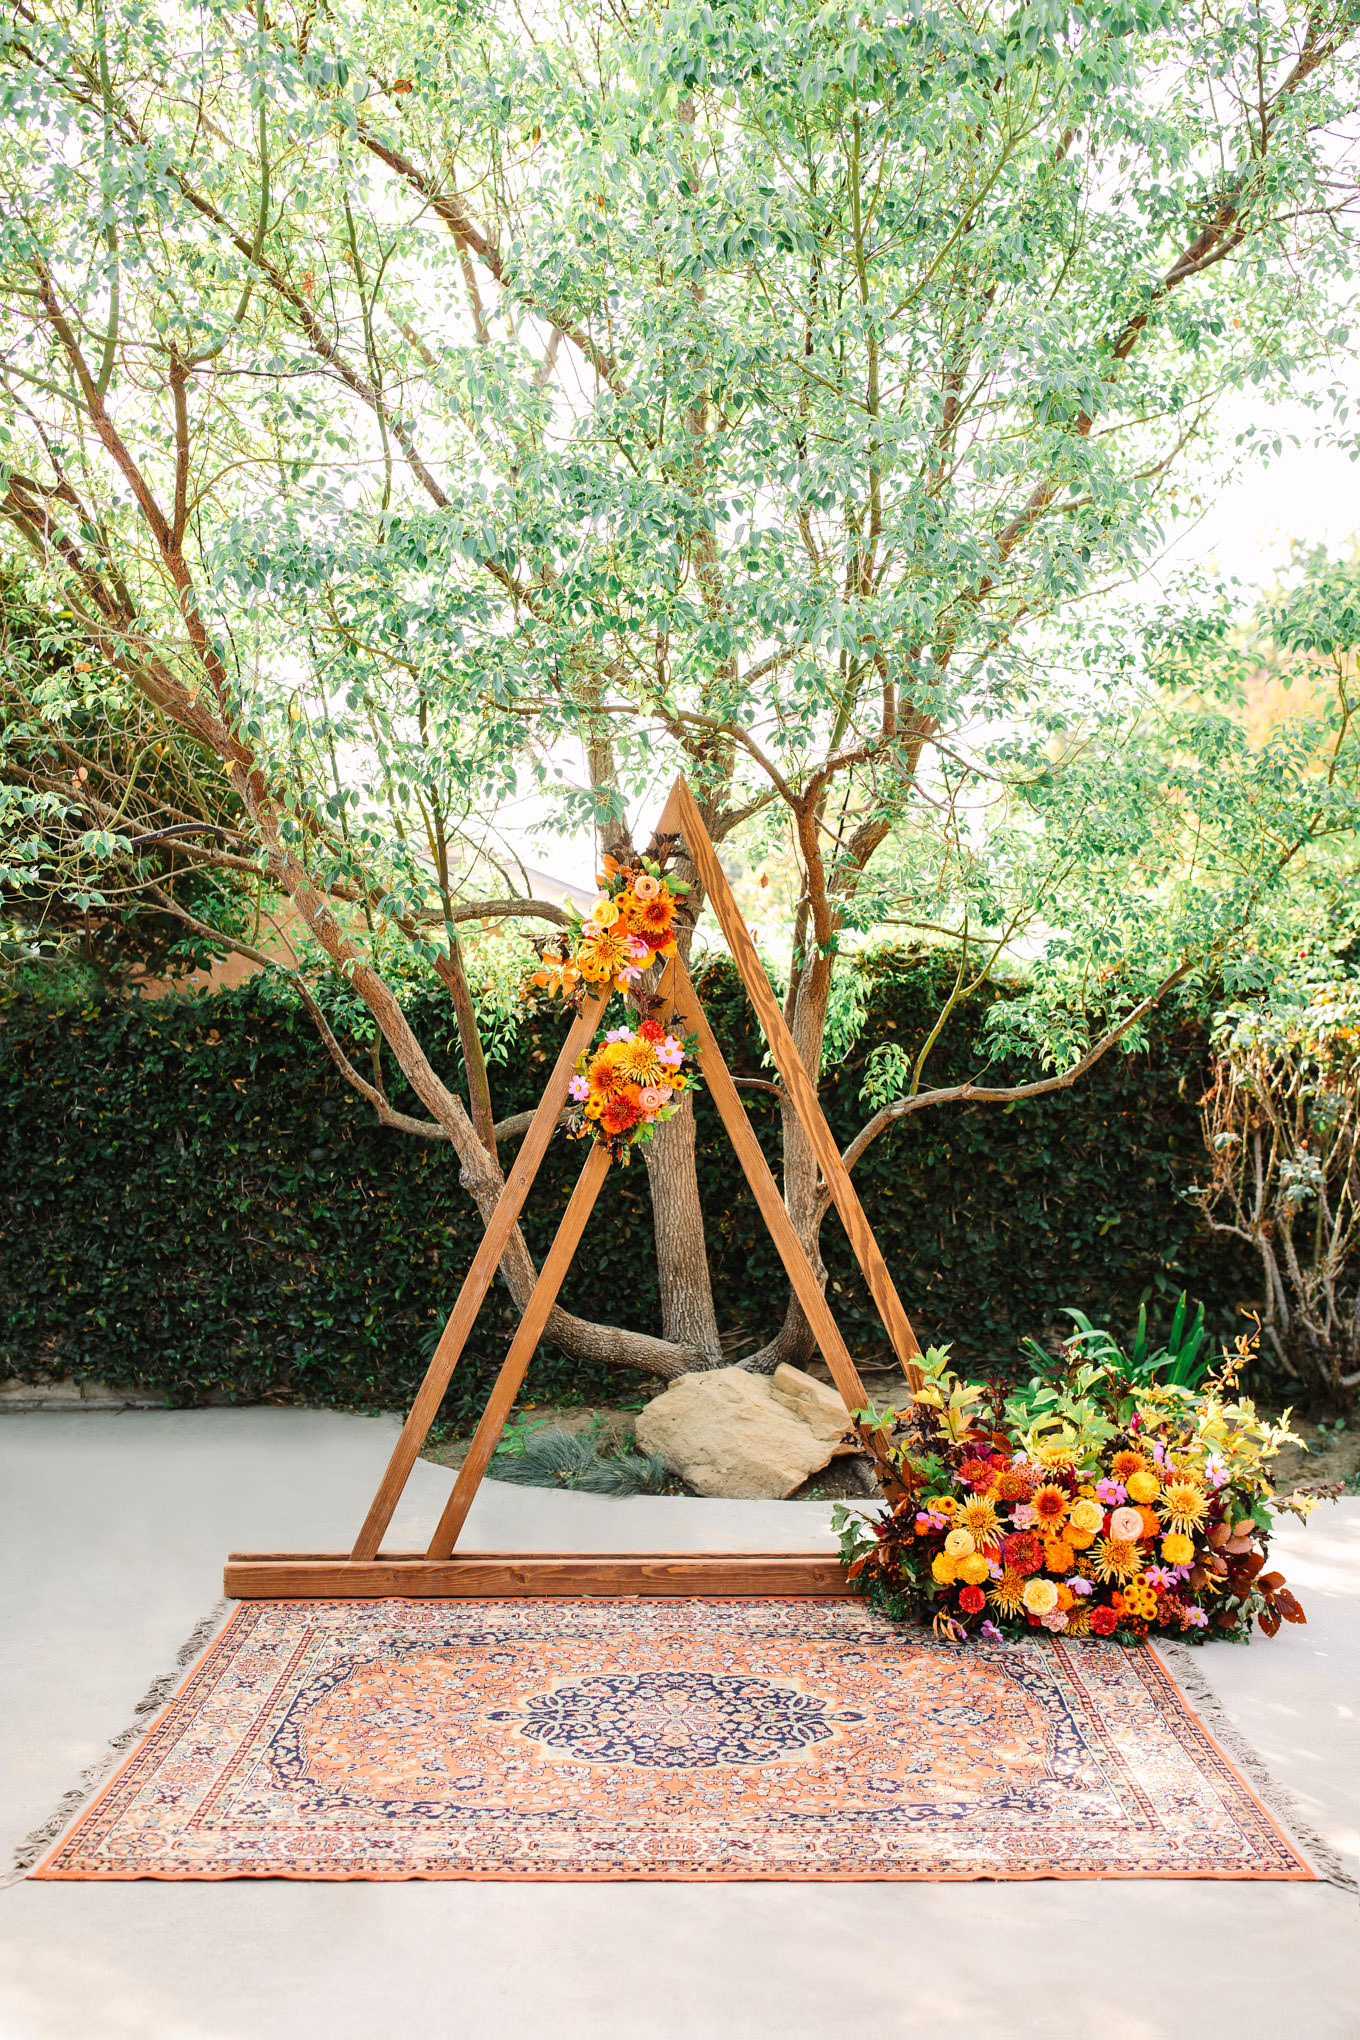 Fun and unique ceremony arch with florals | Vibrant backyard micro wedding featured on Green Wedding Shoes | Colorful LA wedding photography | #losangeleswedding #backyardwedding #microwedding #laweddingphotographer Source: Mary Costa Photography | Los Angeles